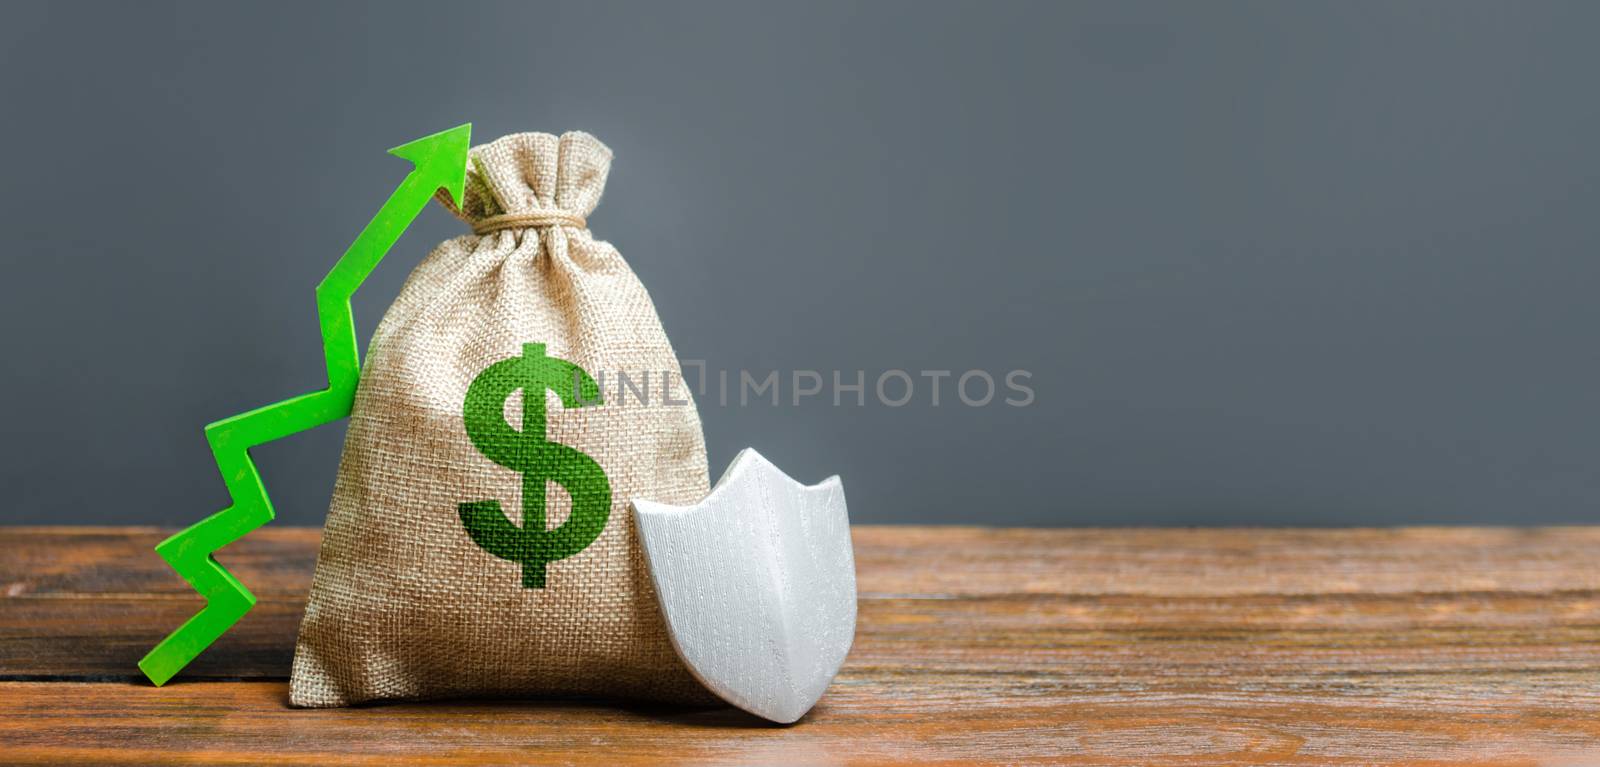 Bag with green dollar symbol, a green arrow up and shield. Concept of protection of money, guaranteed deposits. Client rights protection. safeguarded capital. Increasing the safety of savings